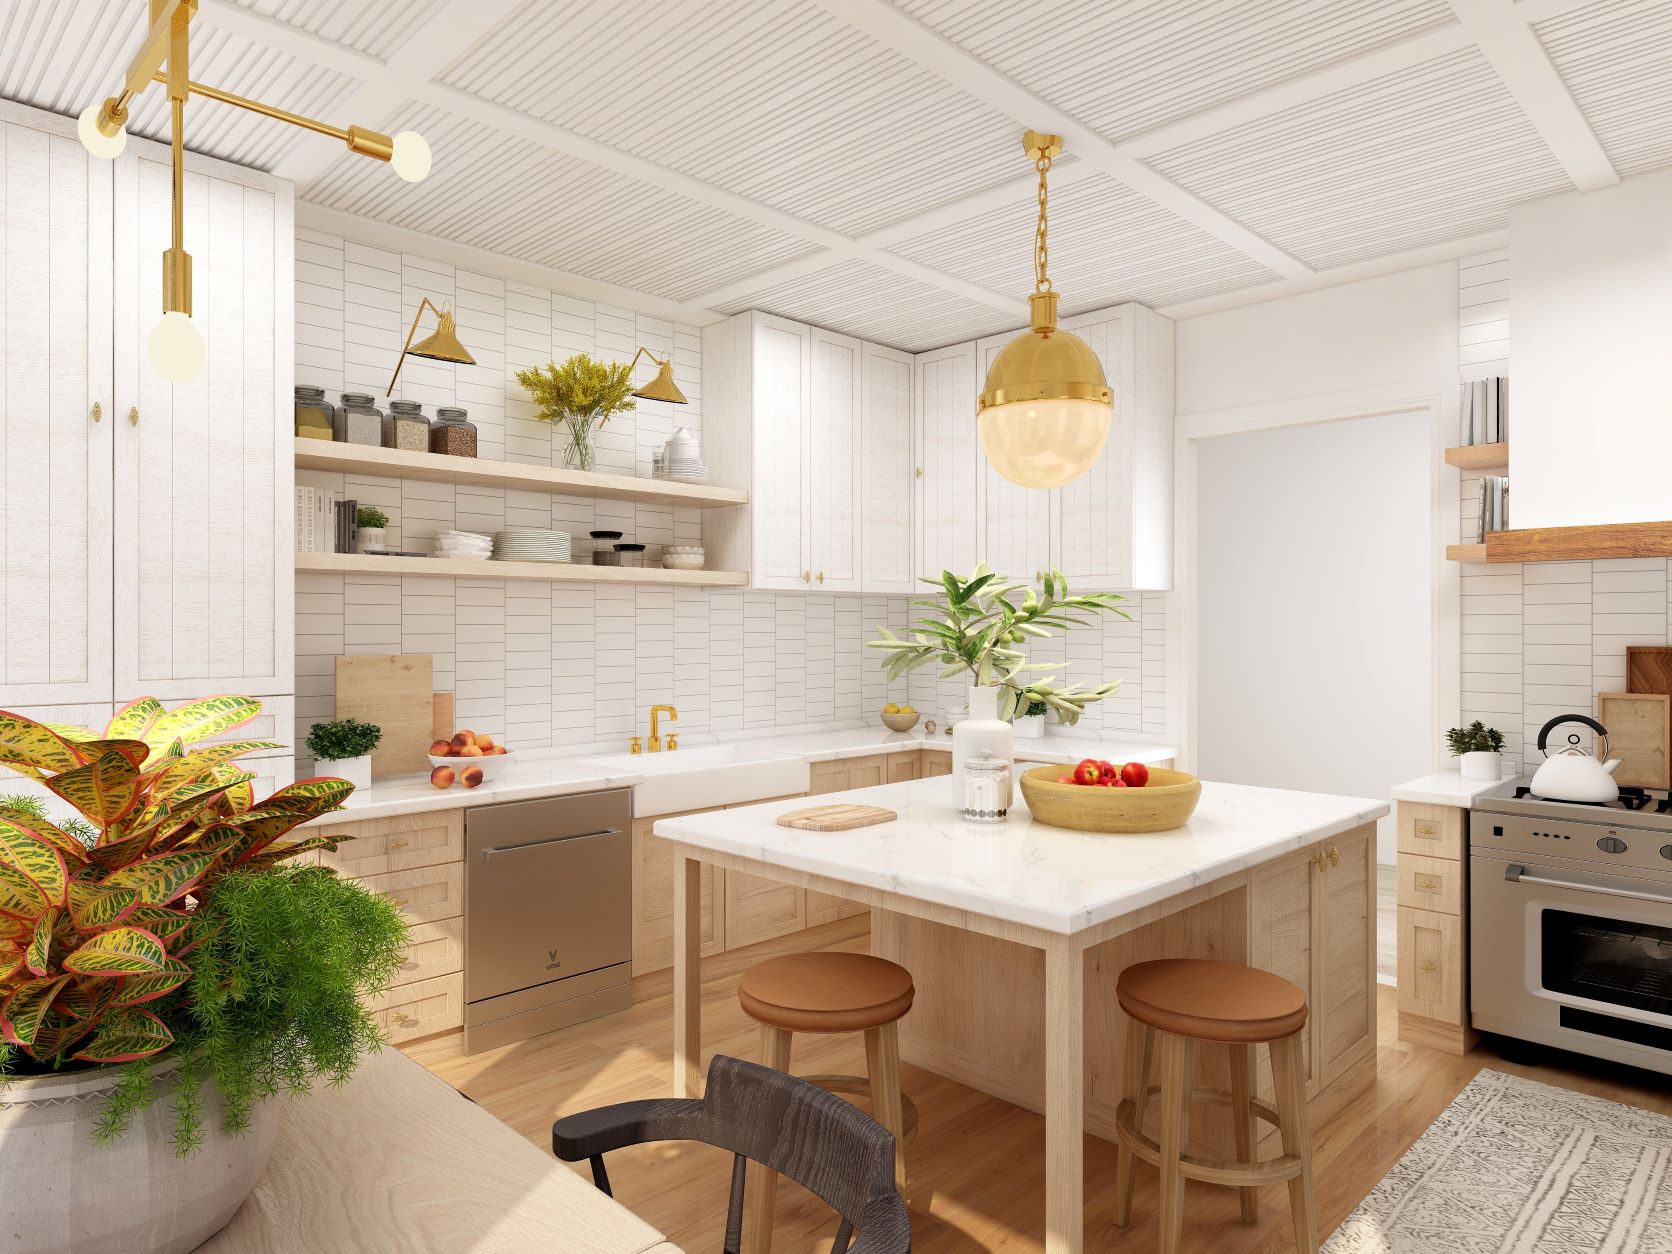 How to include shelving into a kitchen design